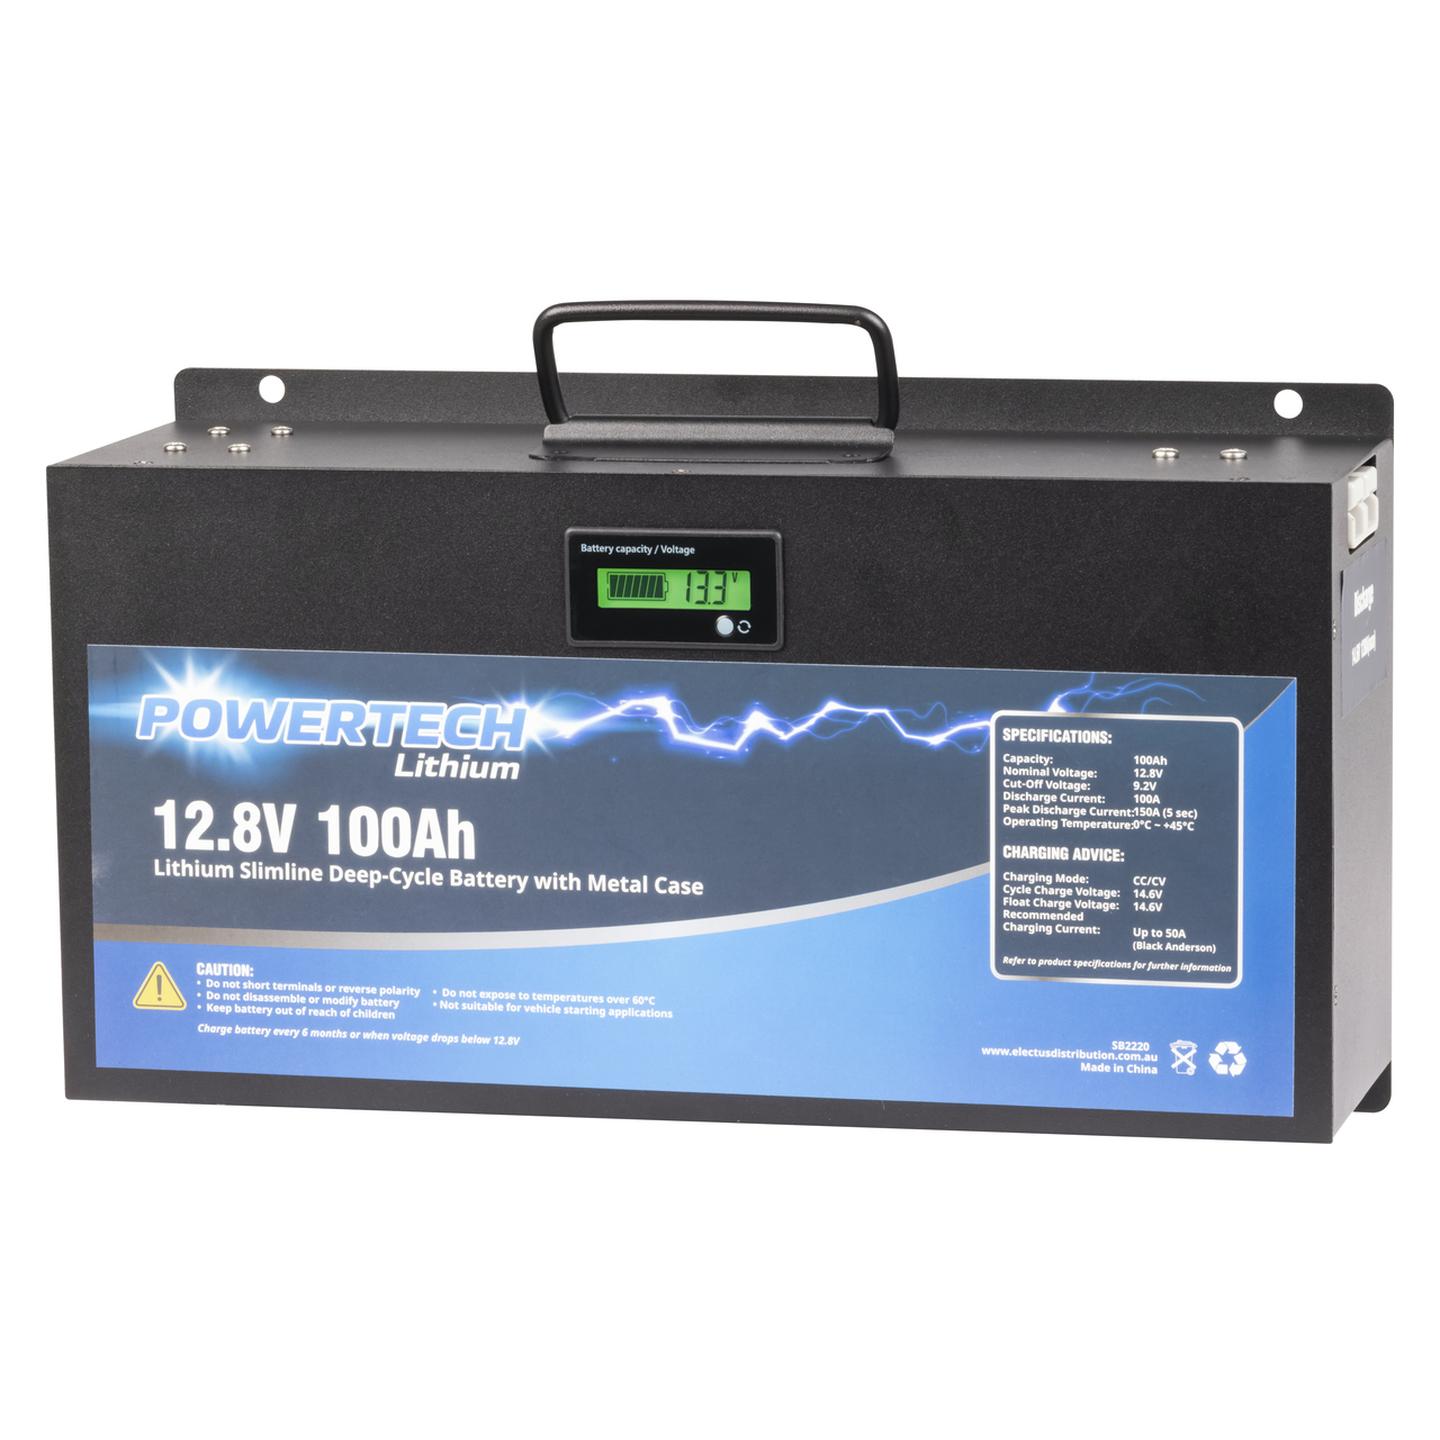 12.8V 100Ah Lithium Slimline Deep Cycle Battery with Metal Case